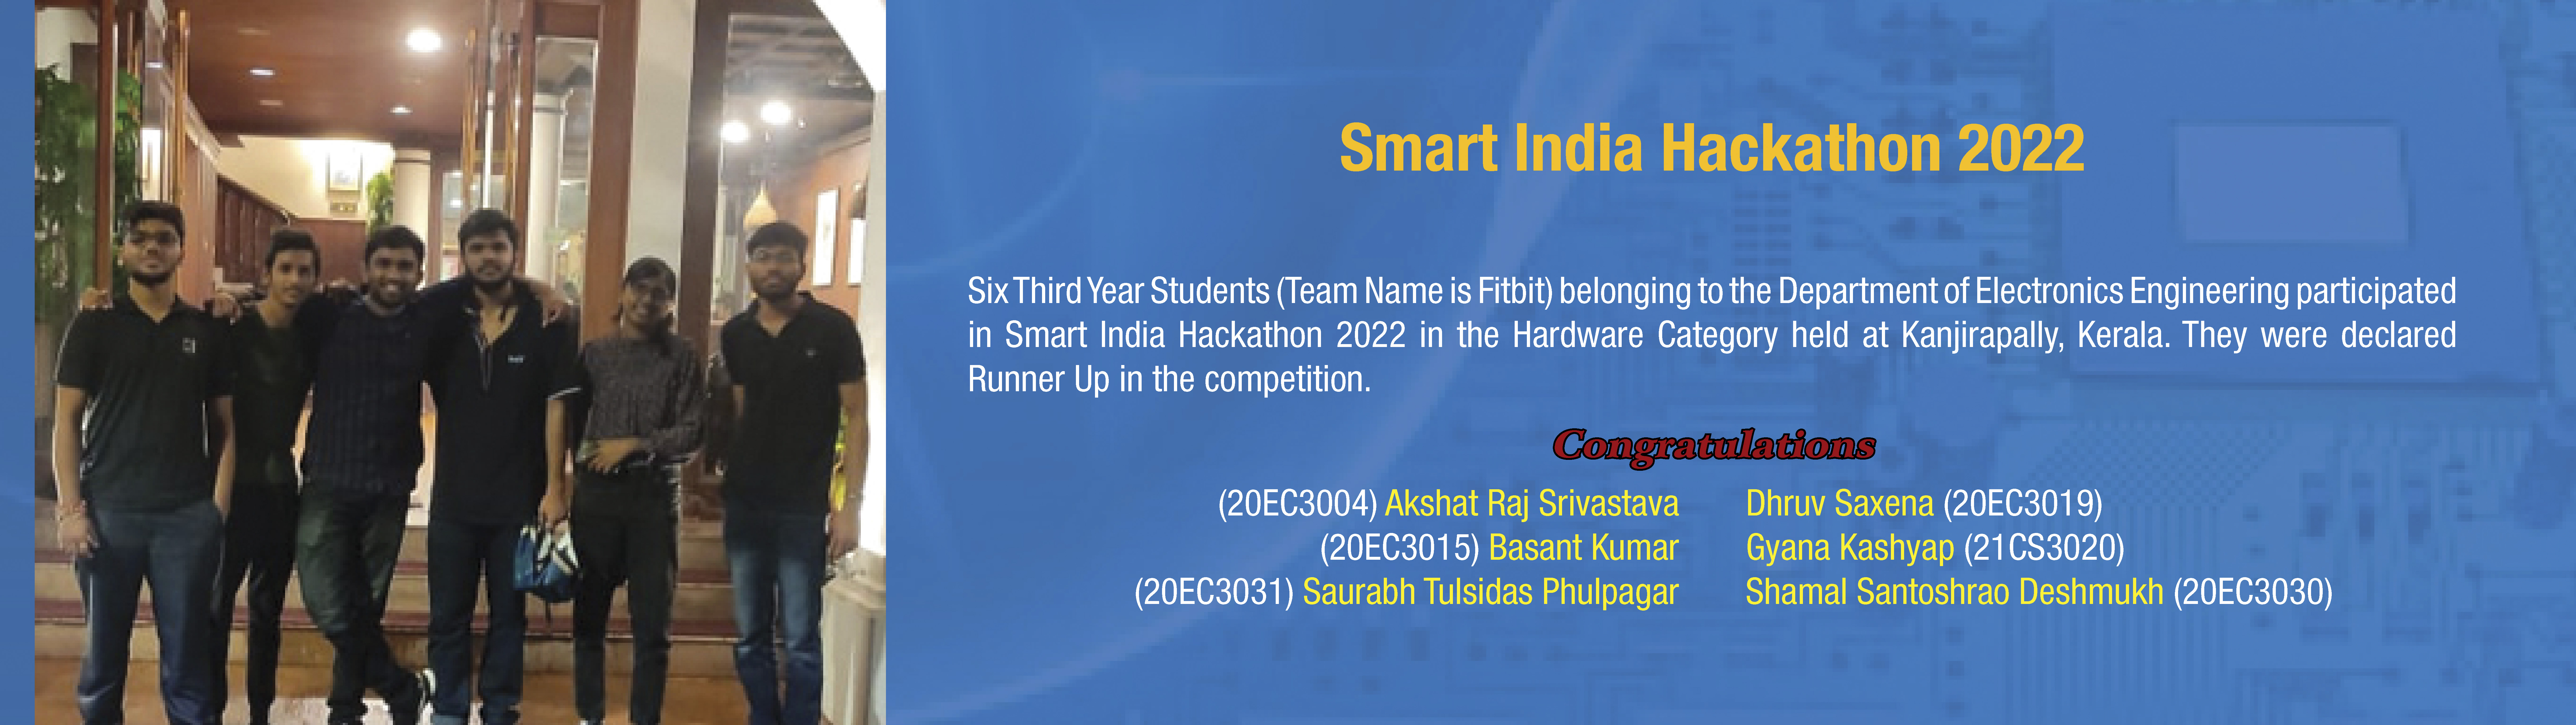 FITBIT Team, declared Runner-up, belonging to the Department of Electronics Engineering, RGIPT || Smart India Hackathon 2022 held at Kanjirapally, Kerala